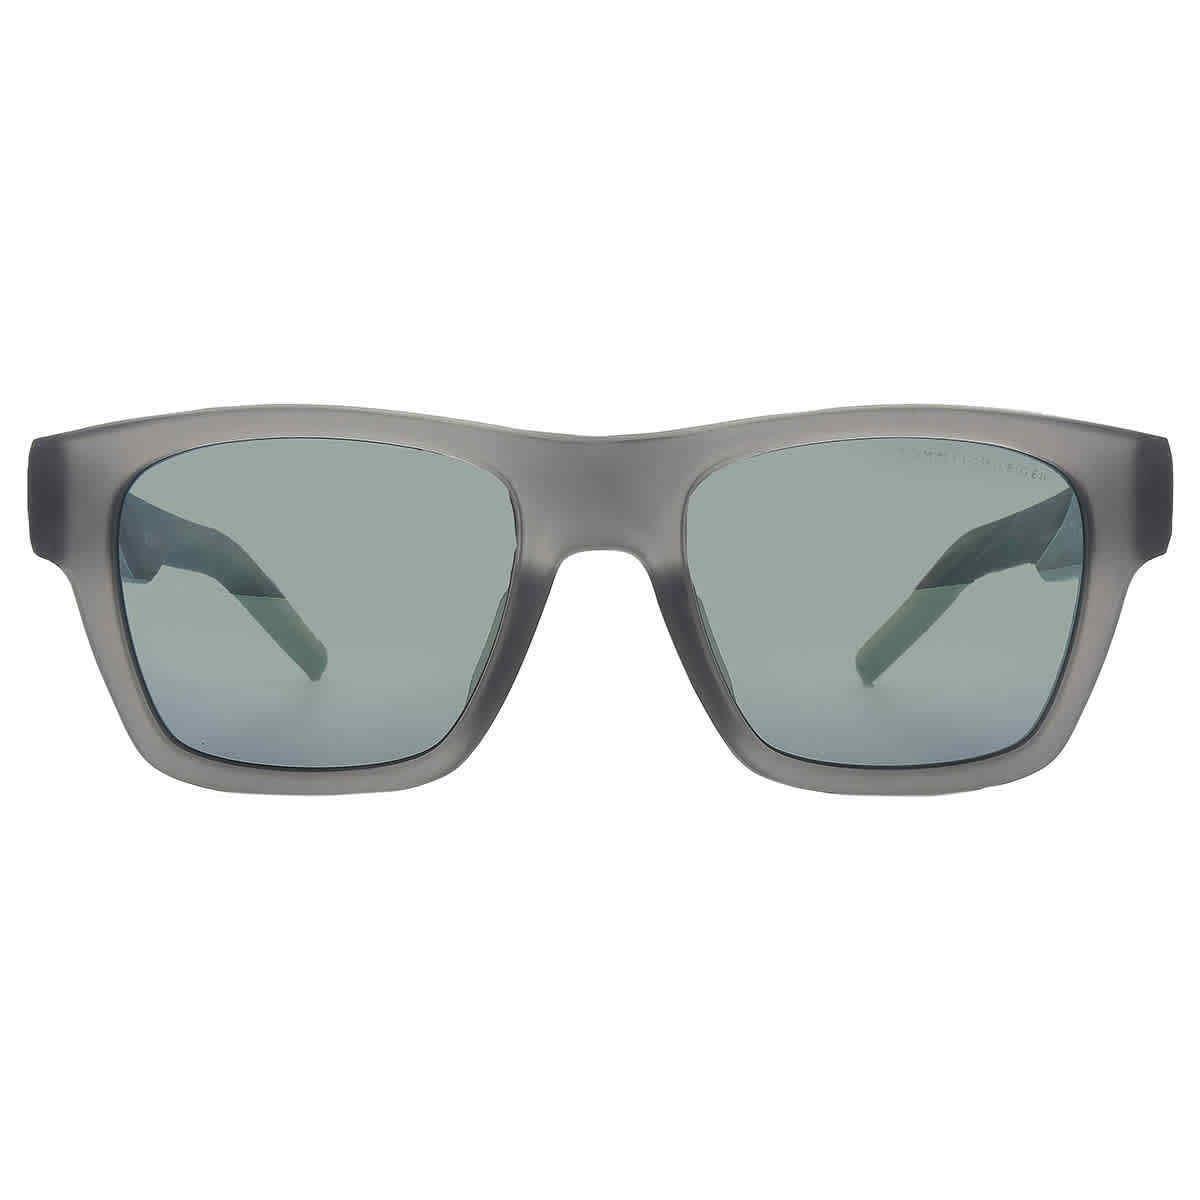 Tommy Hilfiger Grey Green Square Men`s Sunglasses TH 1975/S 0FRE/MT 51